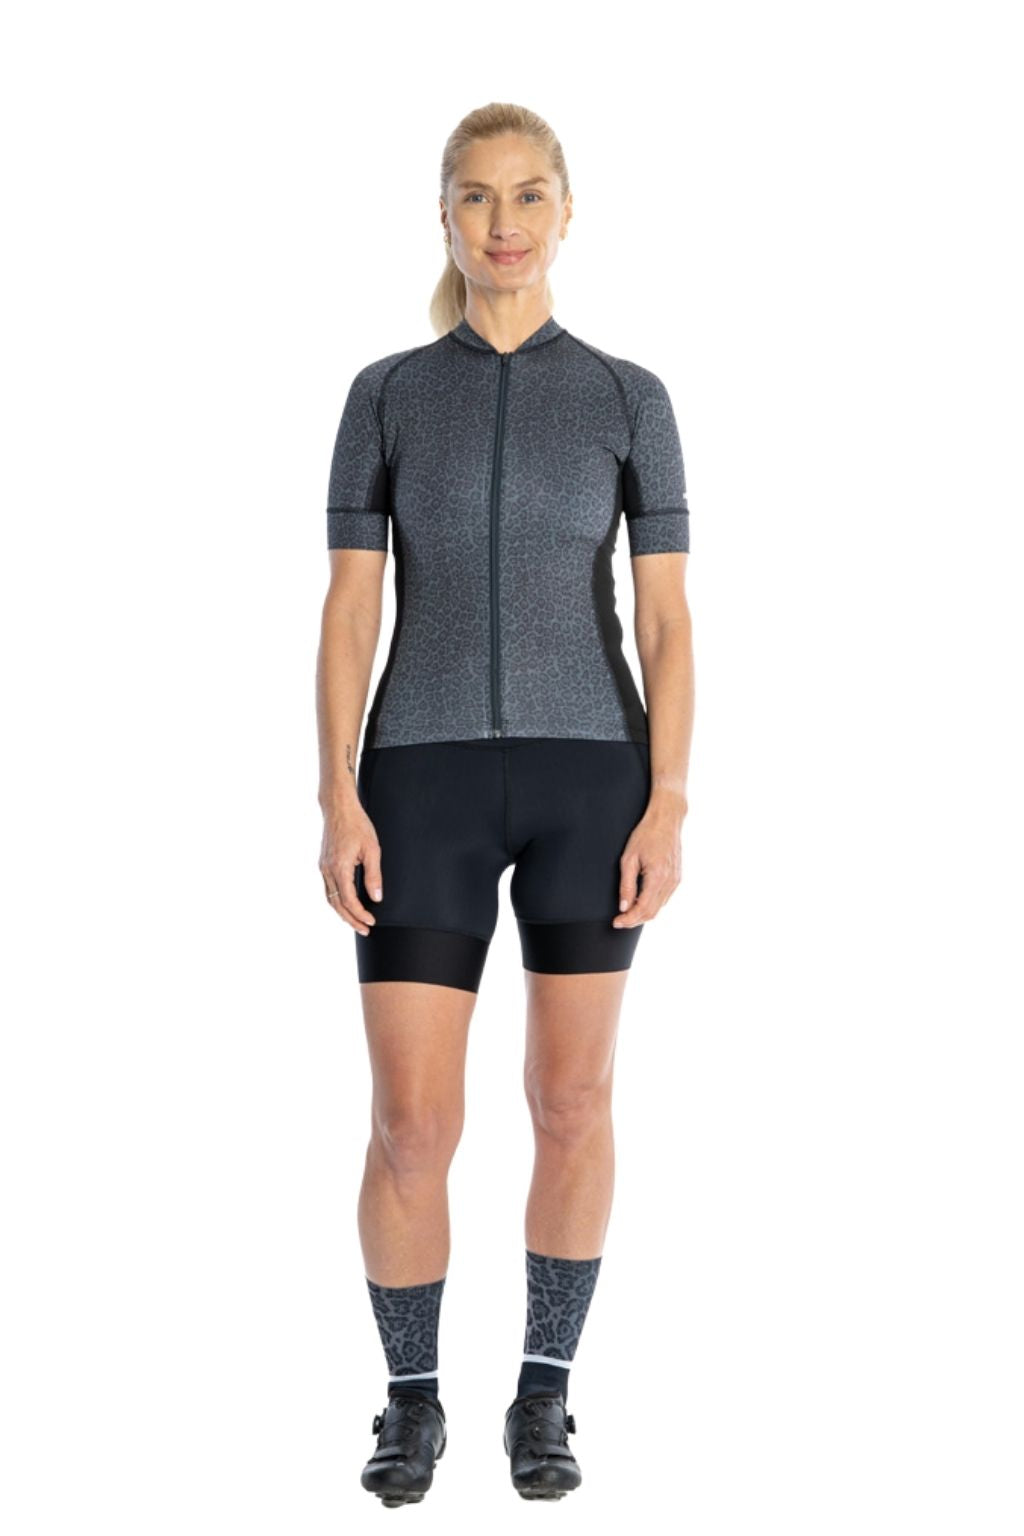 Cycling Shorts 7" - For Women, High Performance, Blackout